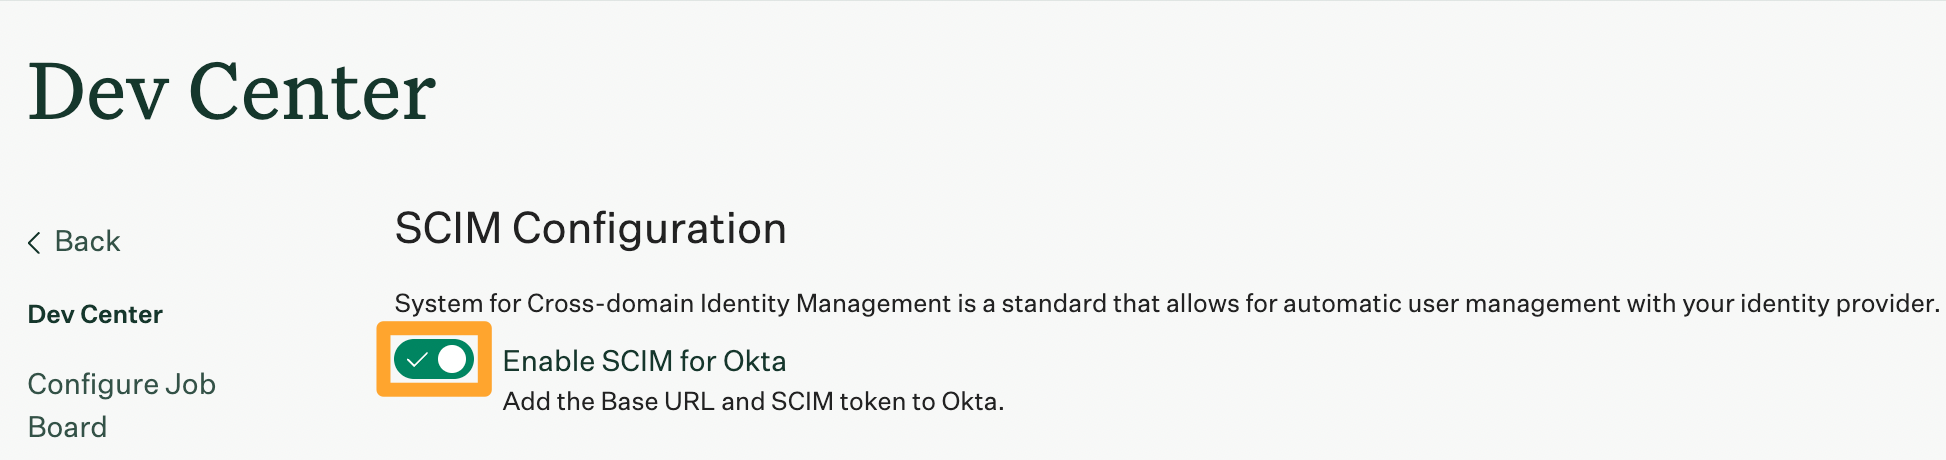 Screenshot-of-the-enable-SCIM-for-okta-toggle.png